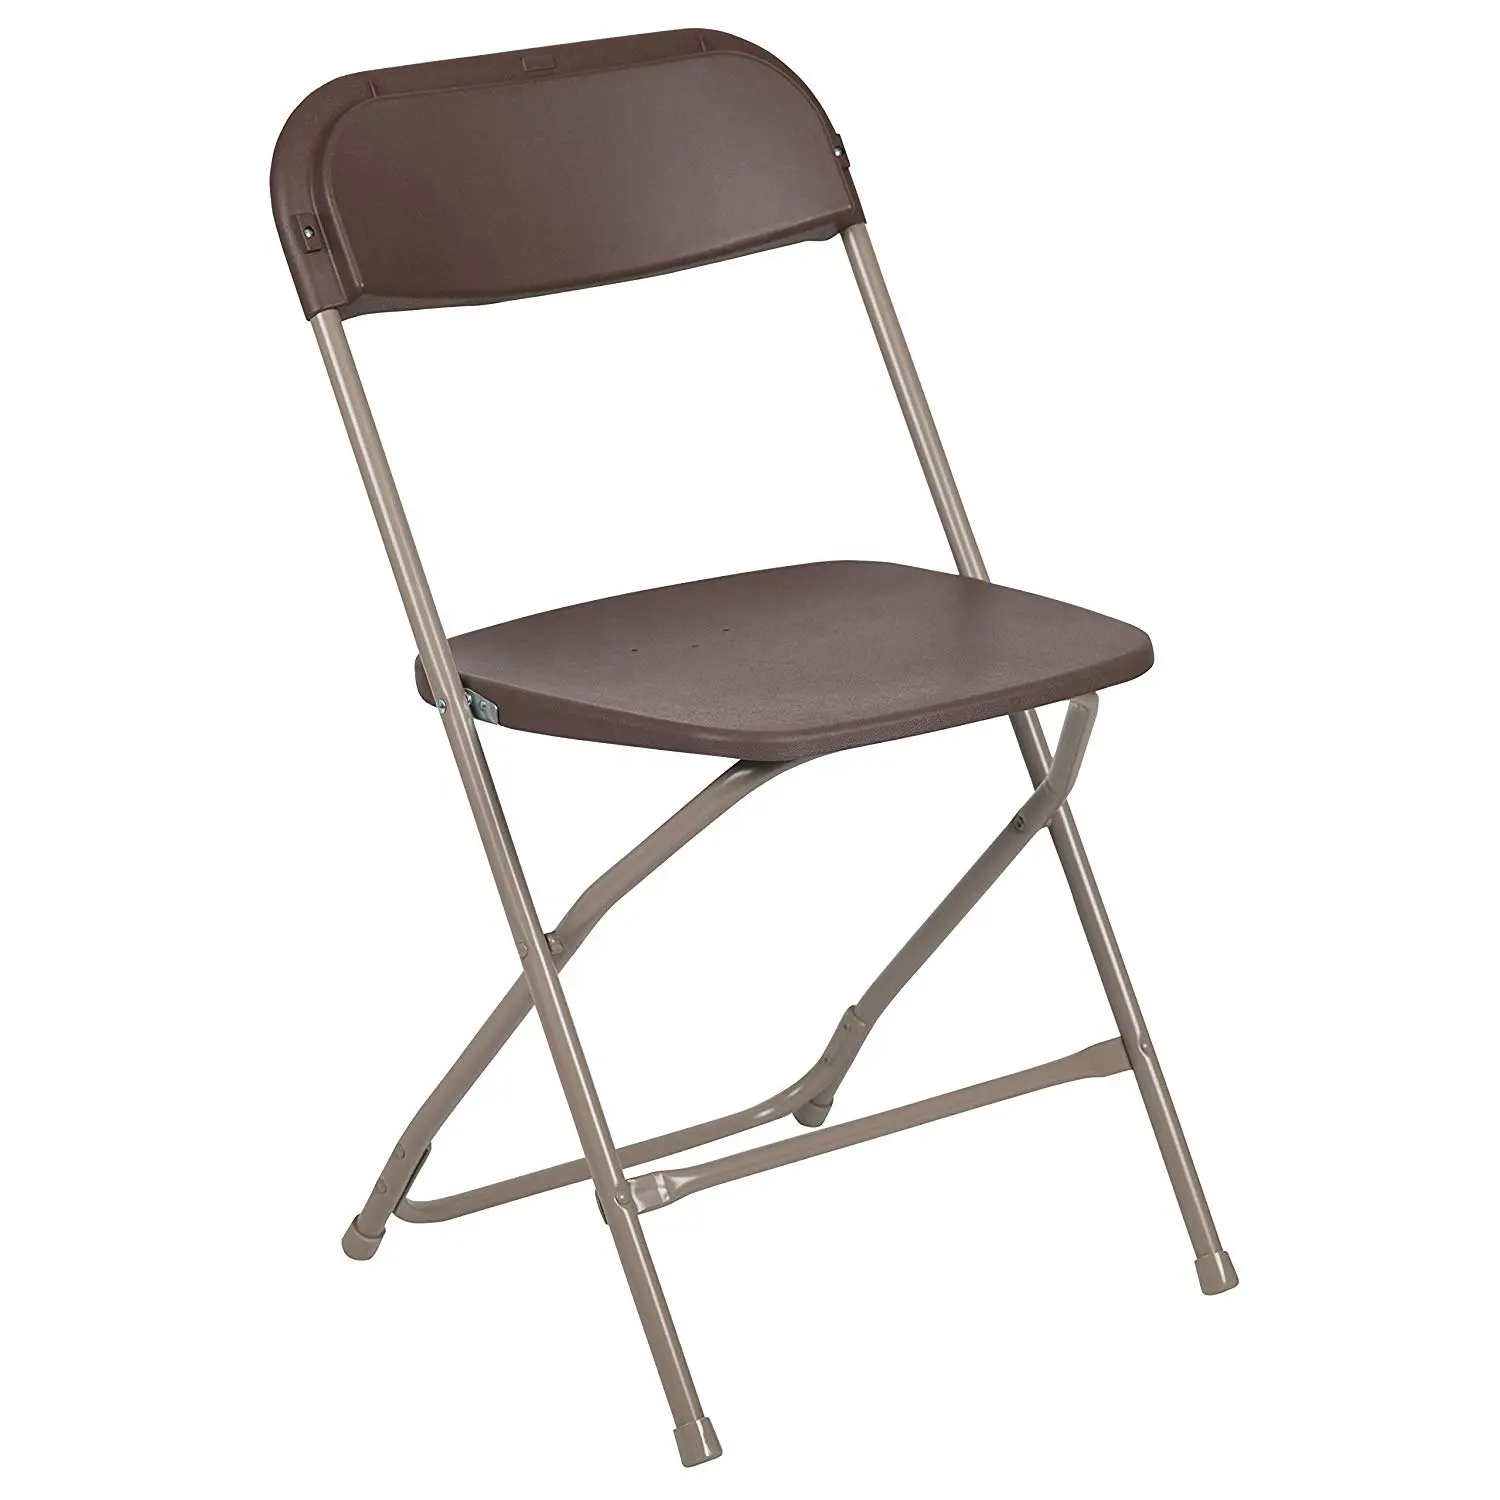 Hot Sale PP Plastic Folding Chair in Brown for Indoor and Outdoor Events like Banquet Wedding Party for Garden Use